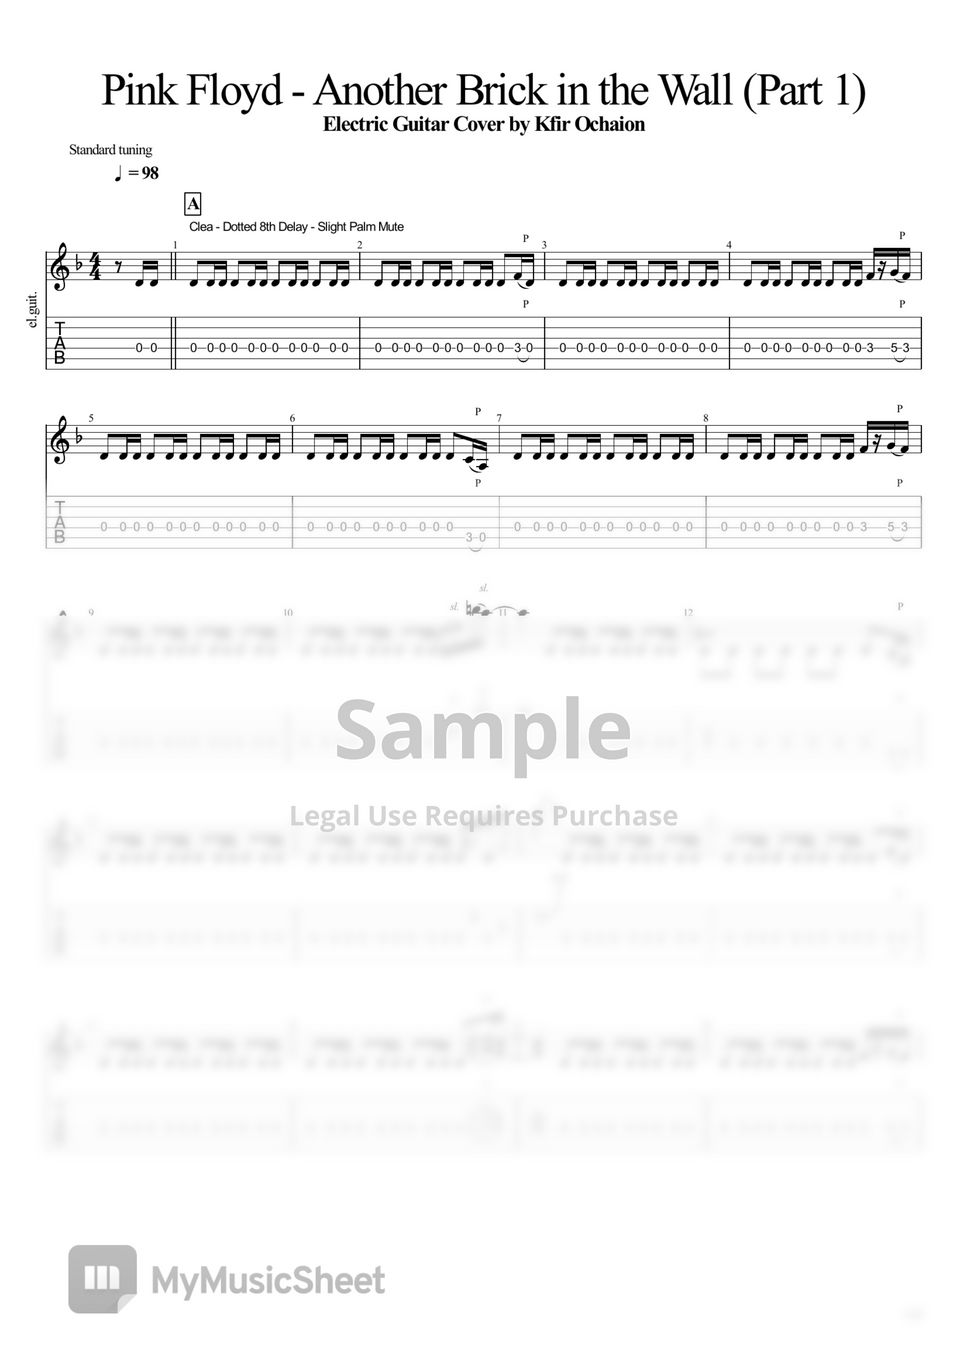 Another Brick in the Wall (Part 3) Tab by Pink Floyd (Guitar Pro) - Full  Score